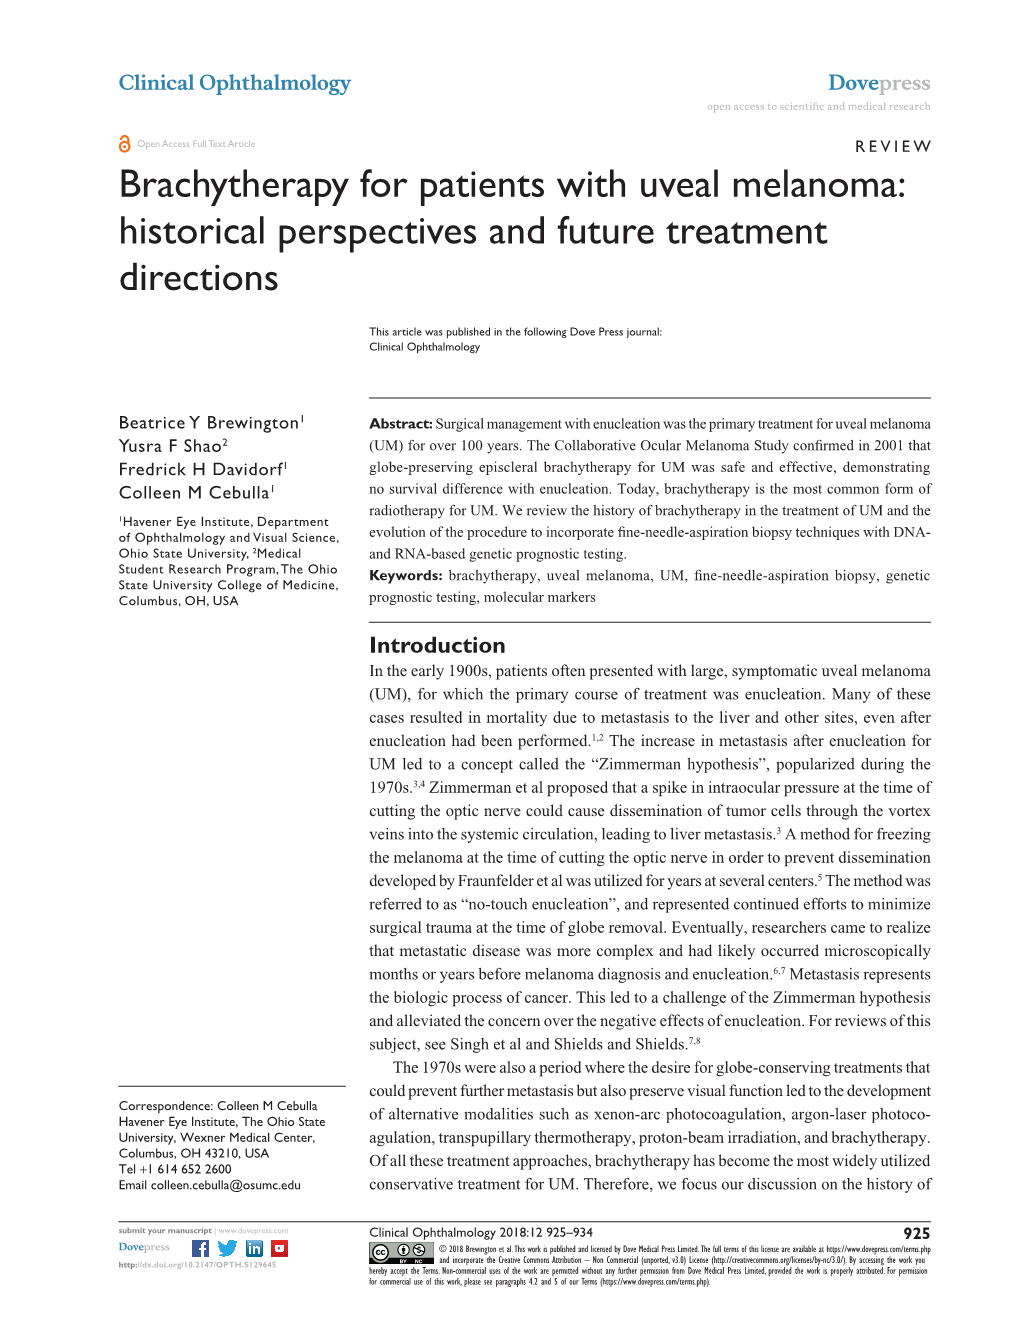 Brachytherapy for Patients with Uveal Melanoma: Historical Perspectives and Future Treatment Directions